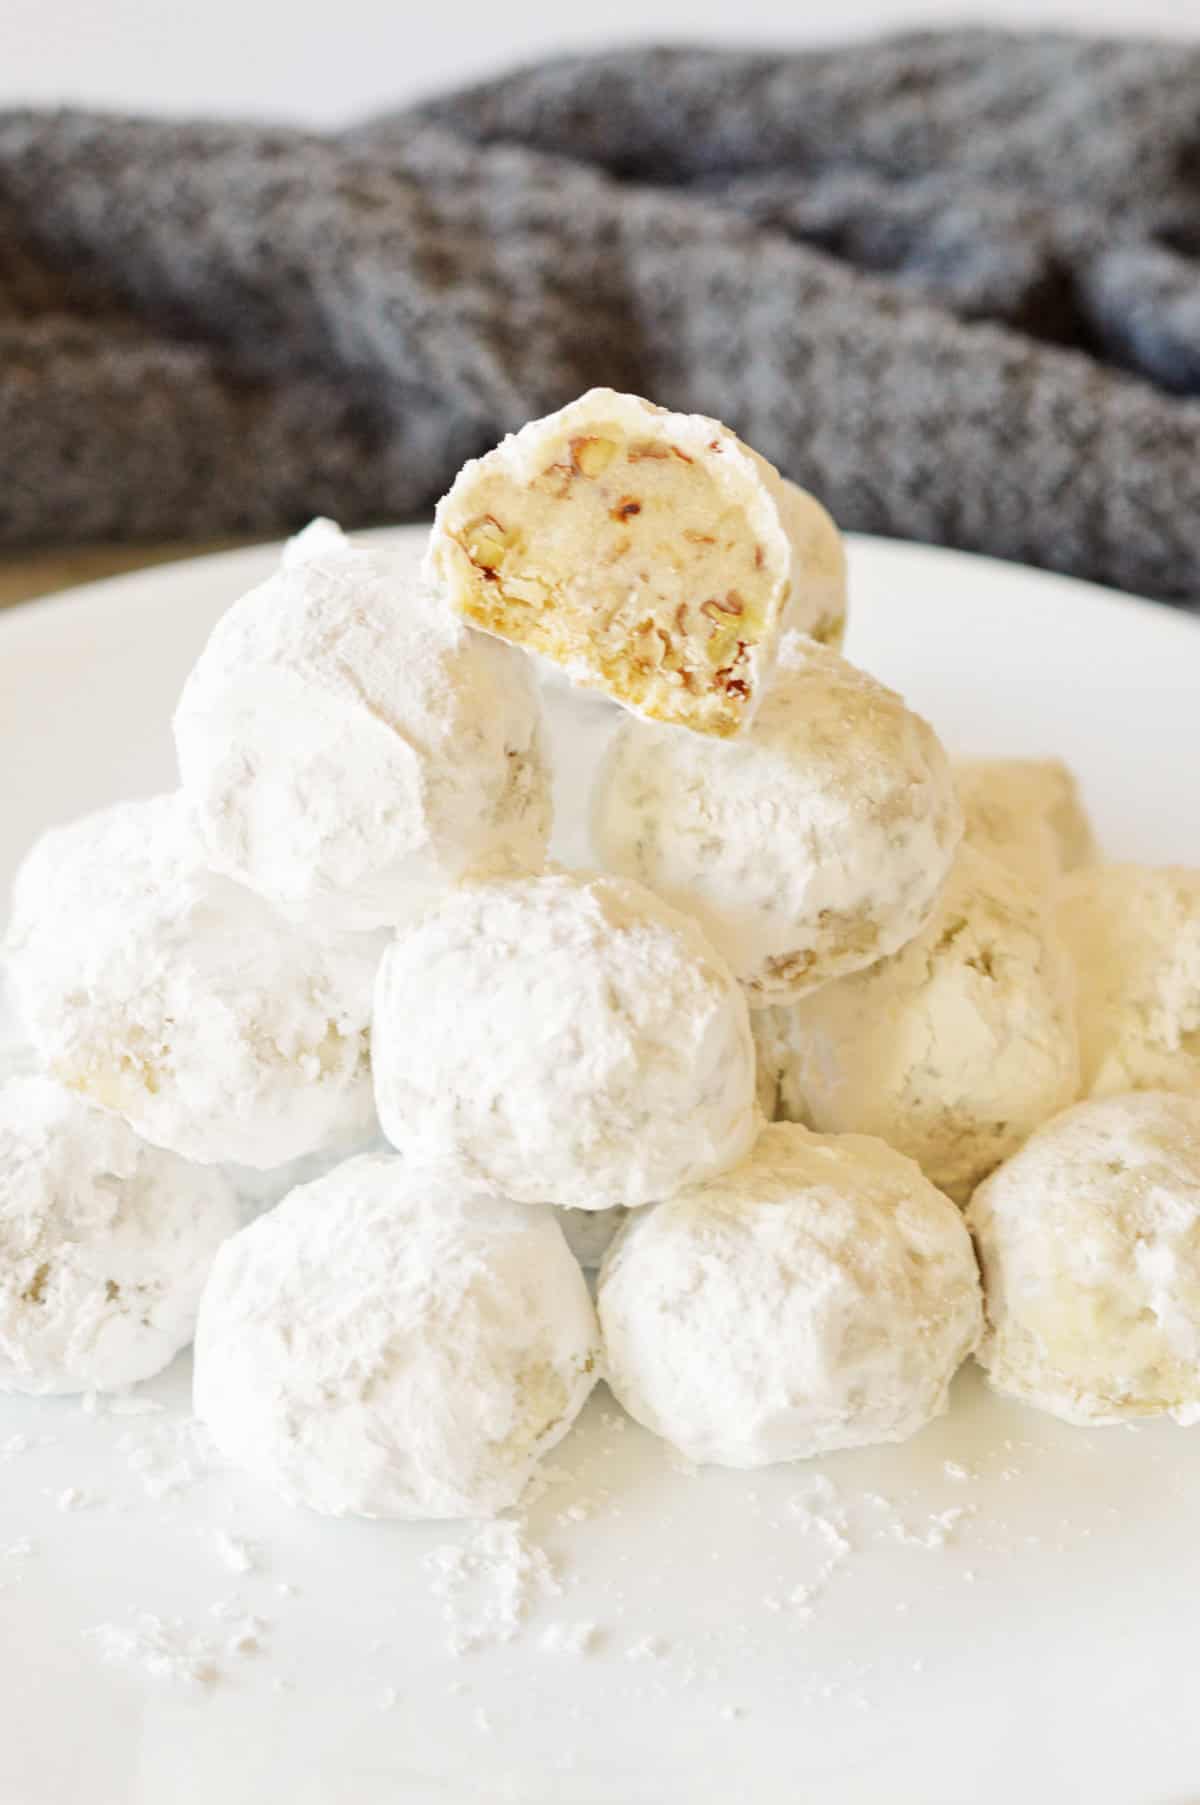 Stack of buttery pecan snowballs with top cookie cut in half to show pecan stuffed inside.